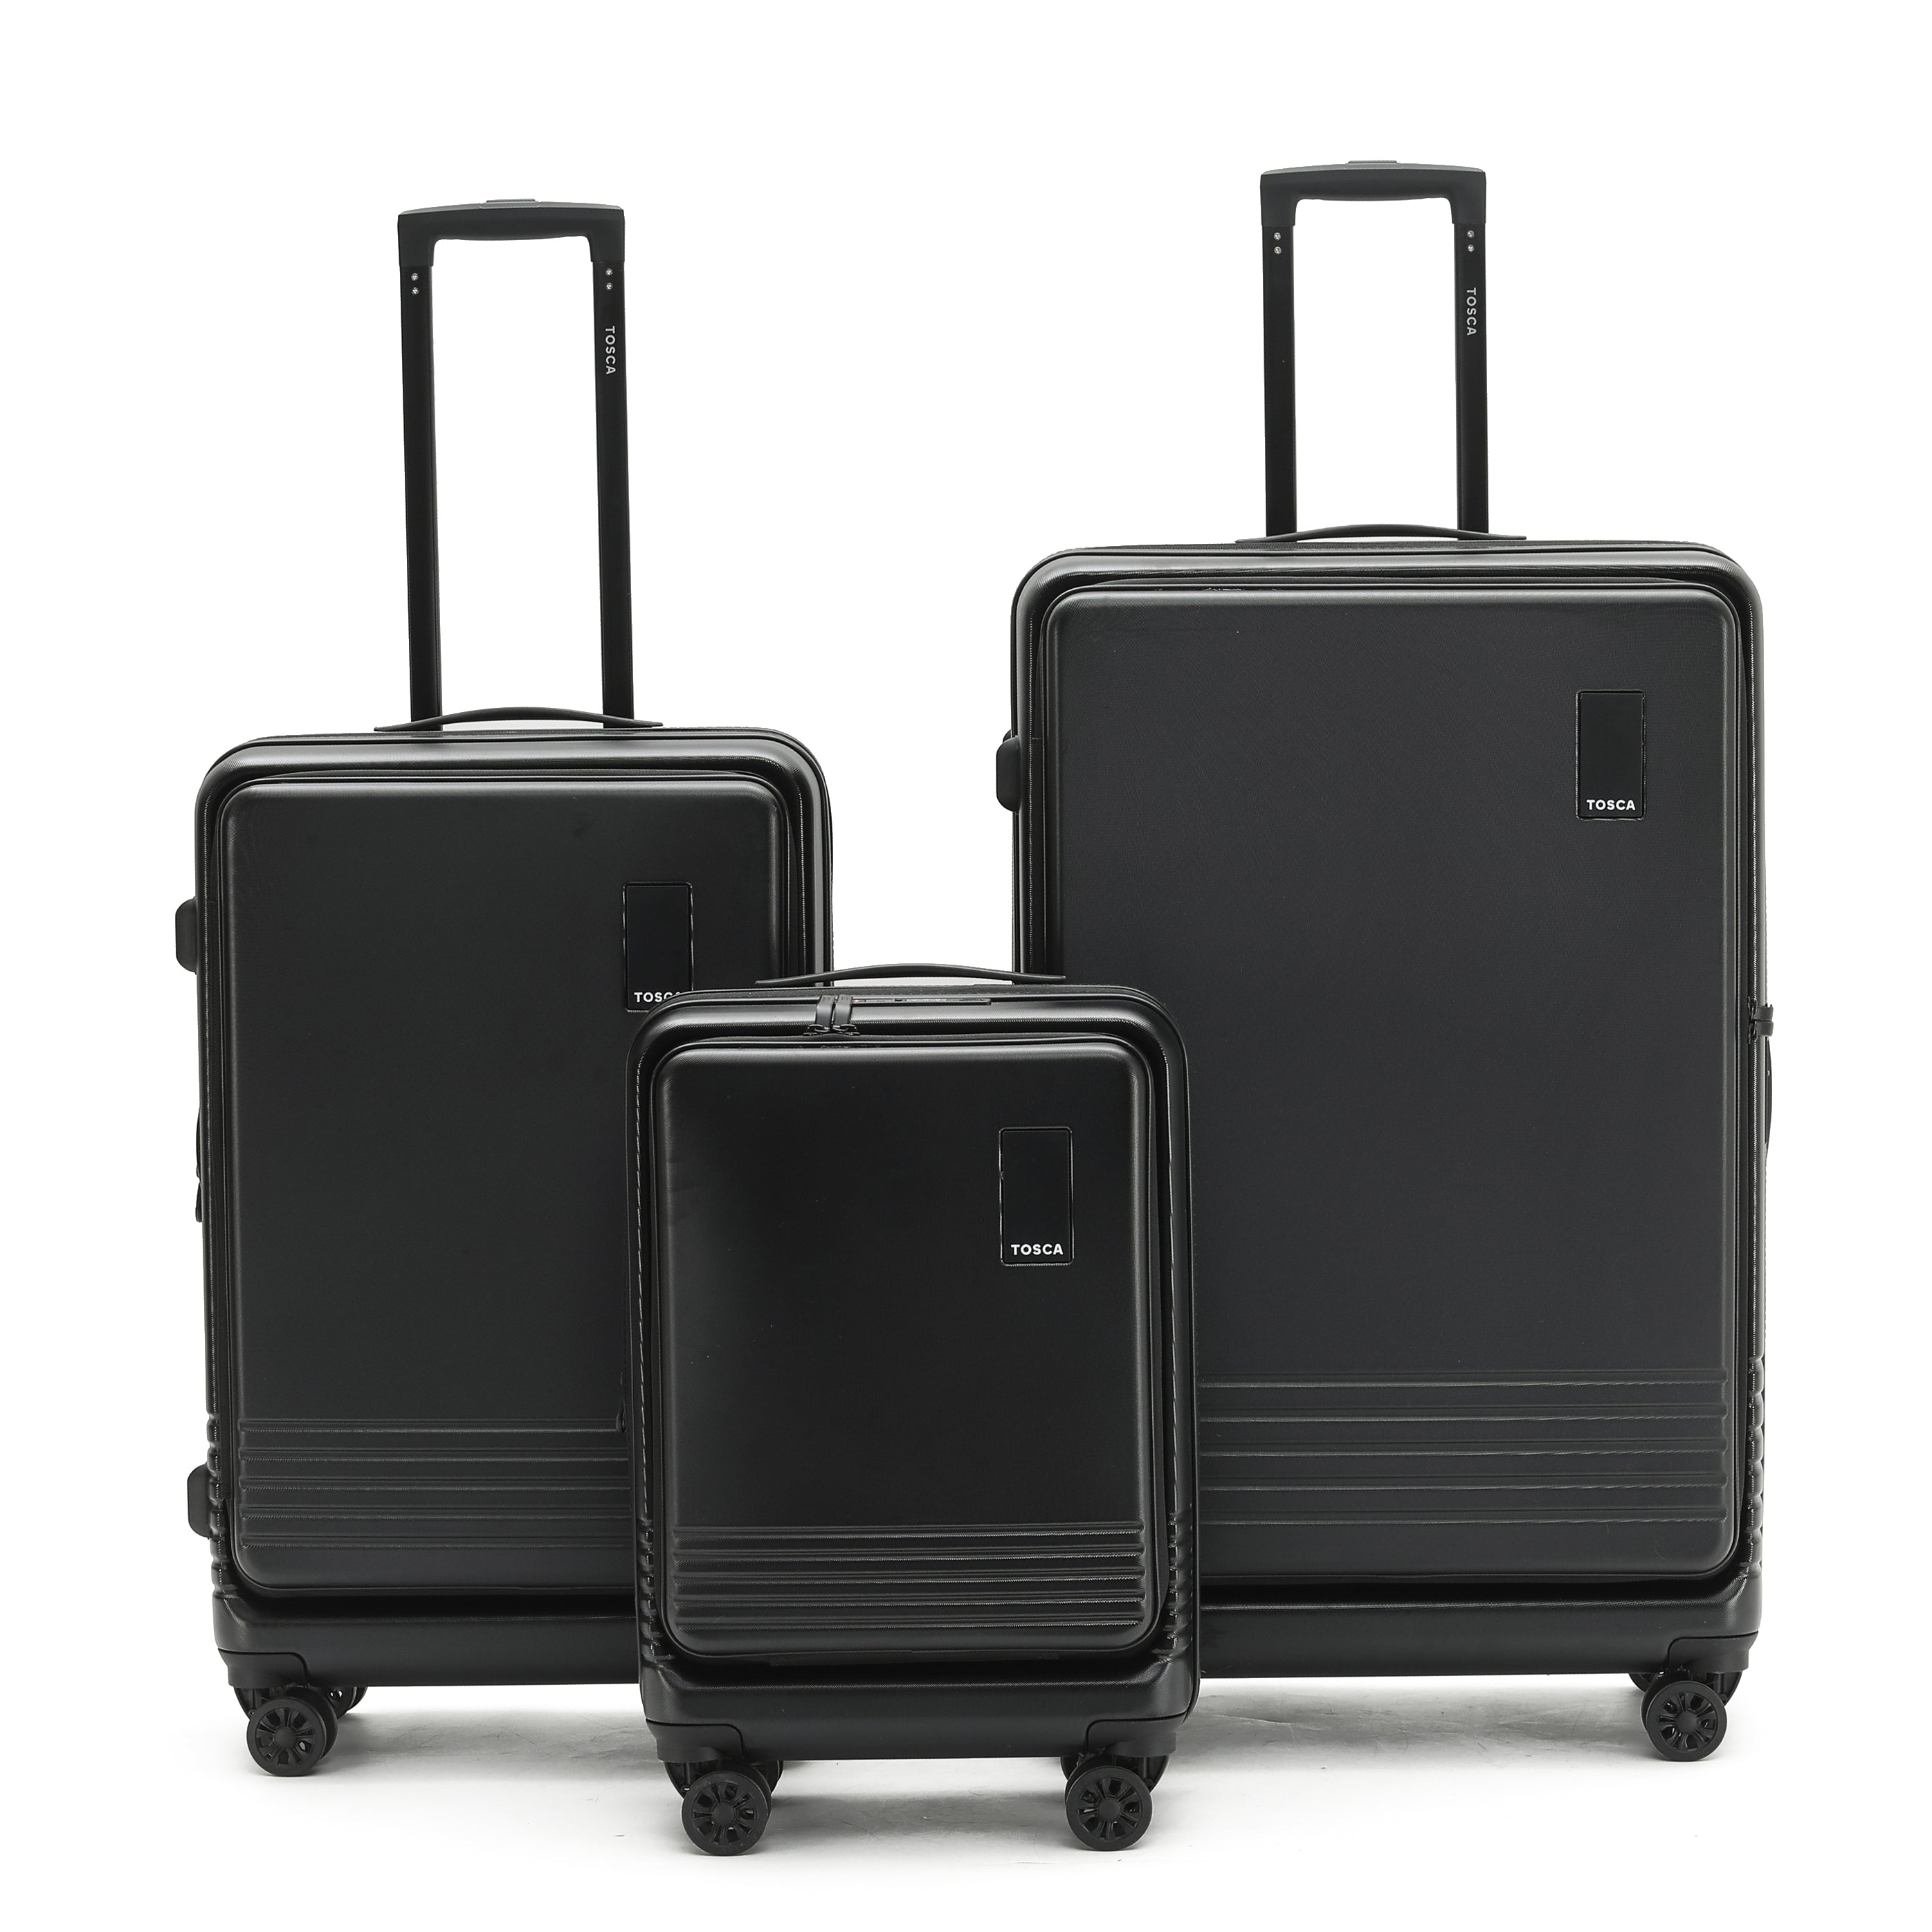 Tosca - TCA644 Horizon Front lid opening Set of 3 suitcases - Black